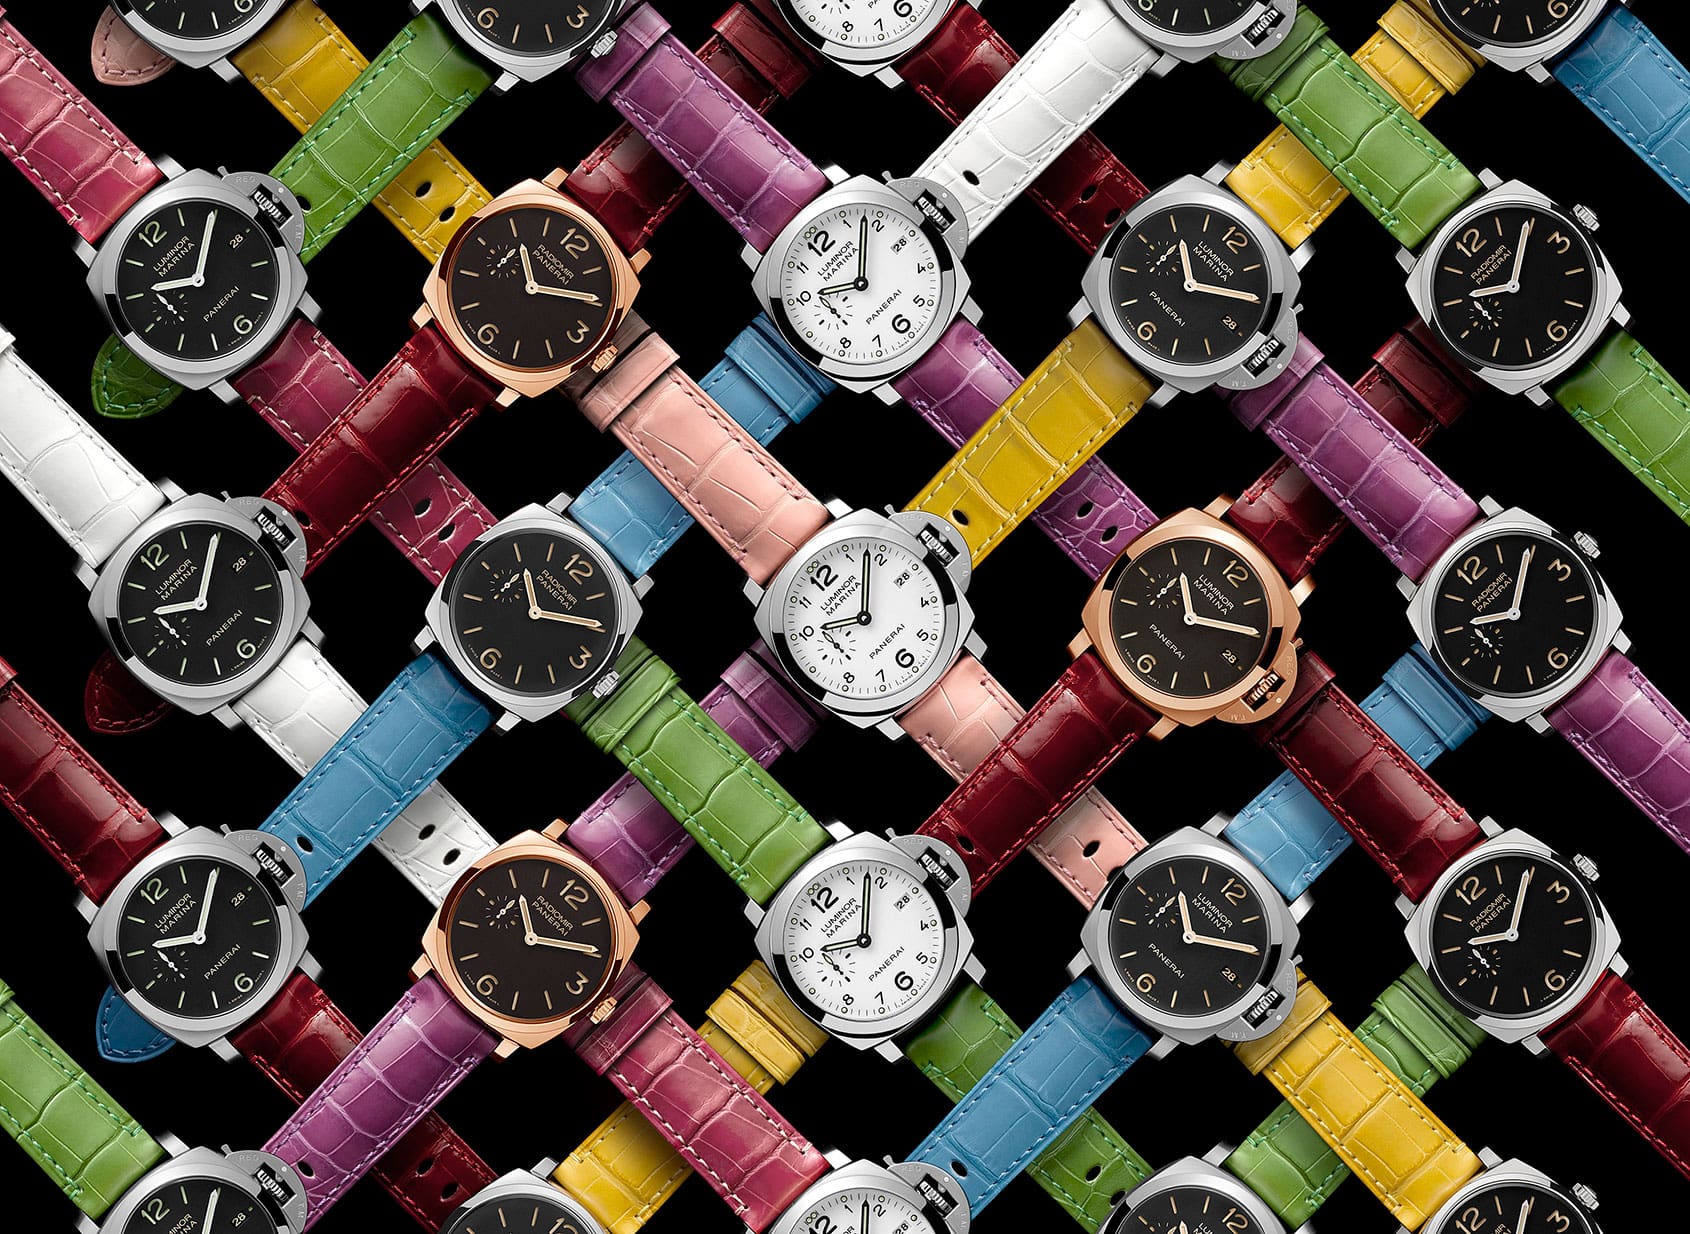 NEWS: Panerai straps itself in for good times with colour pop range.